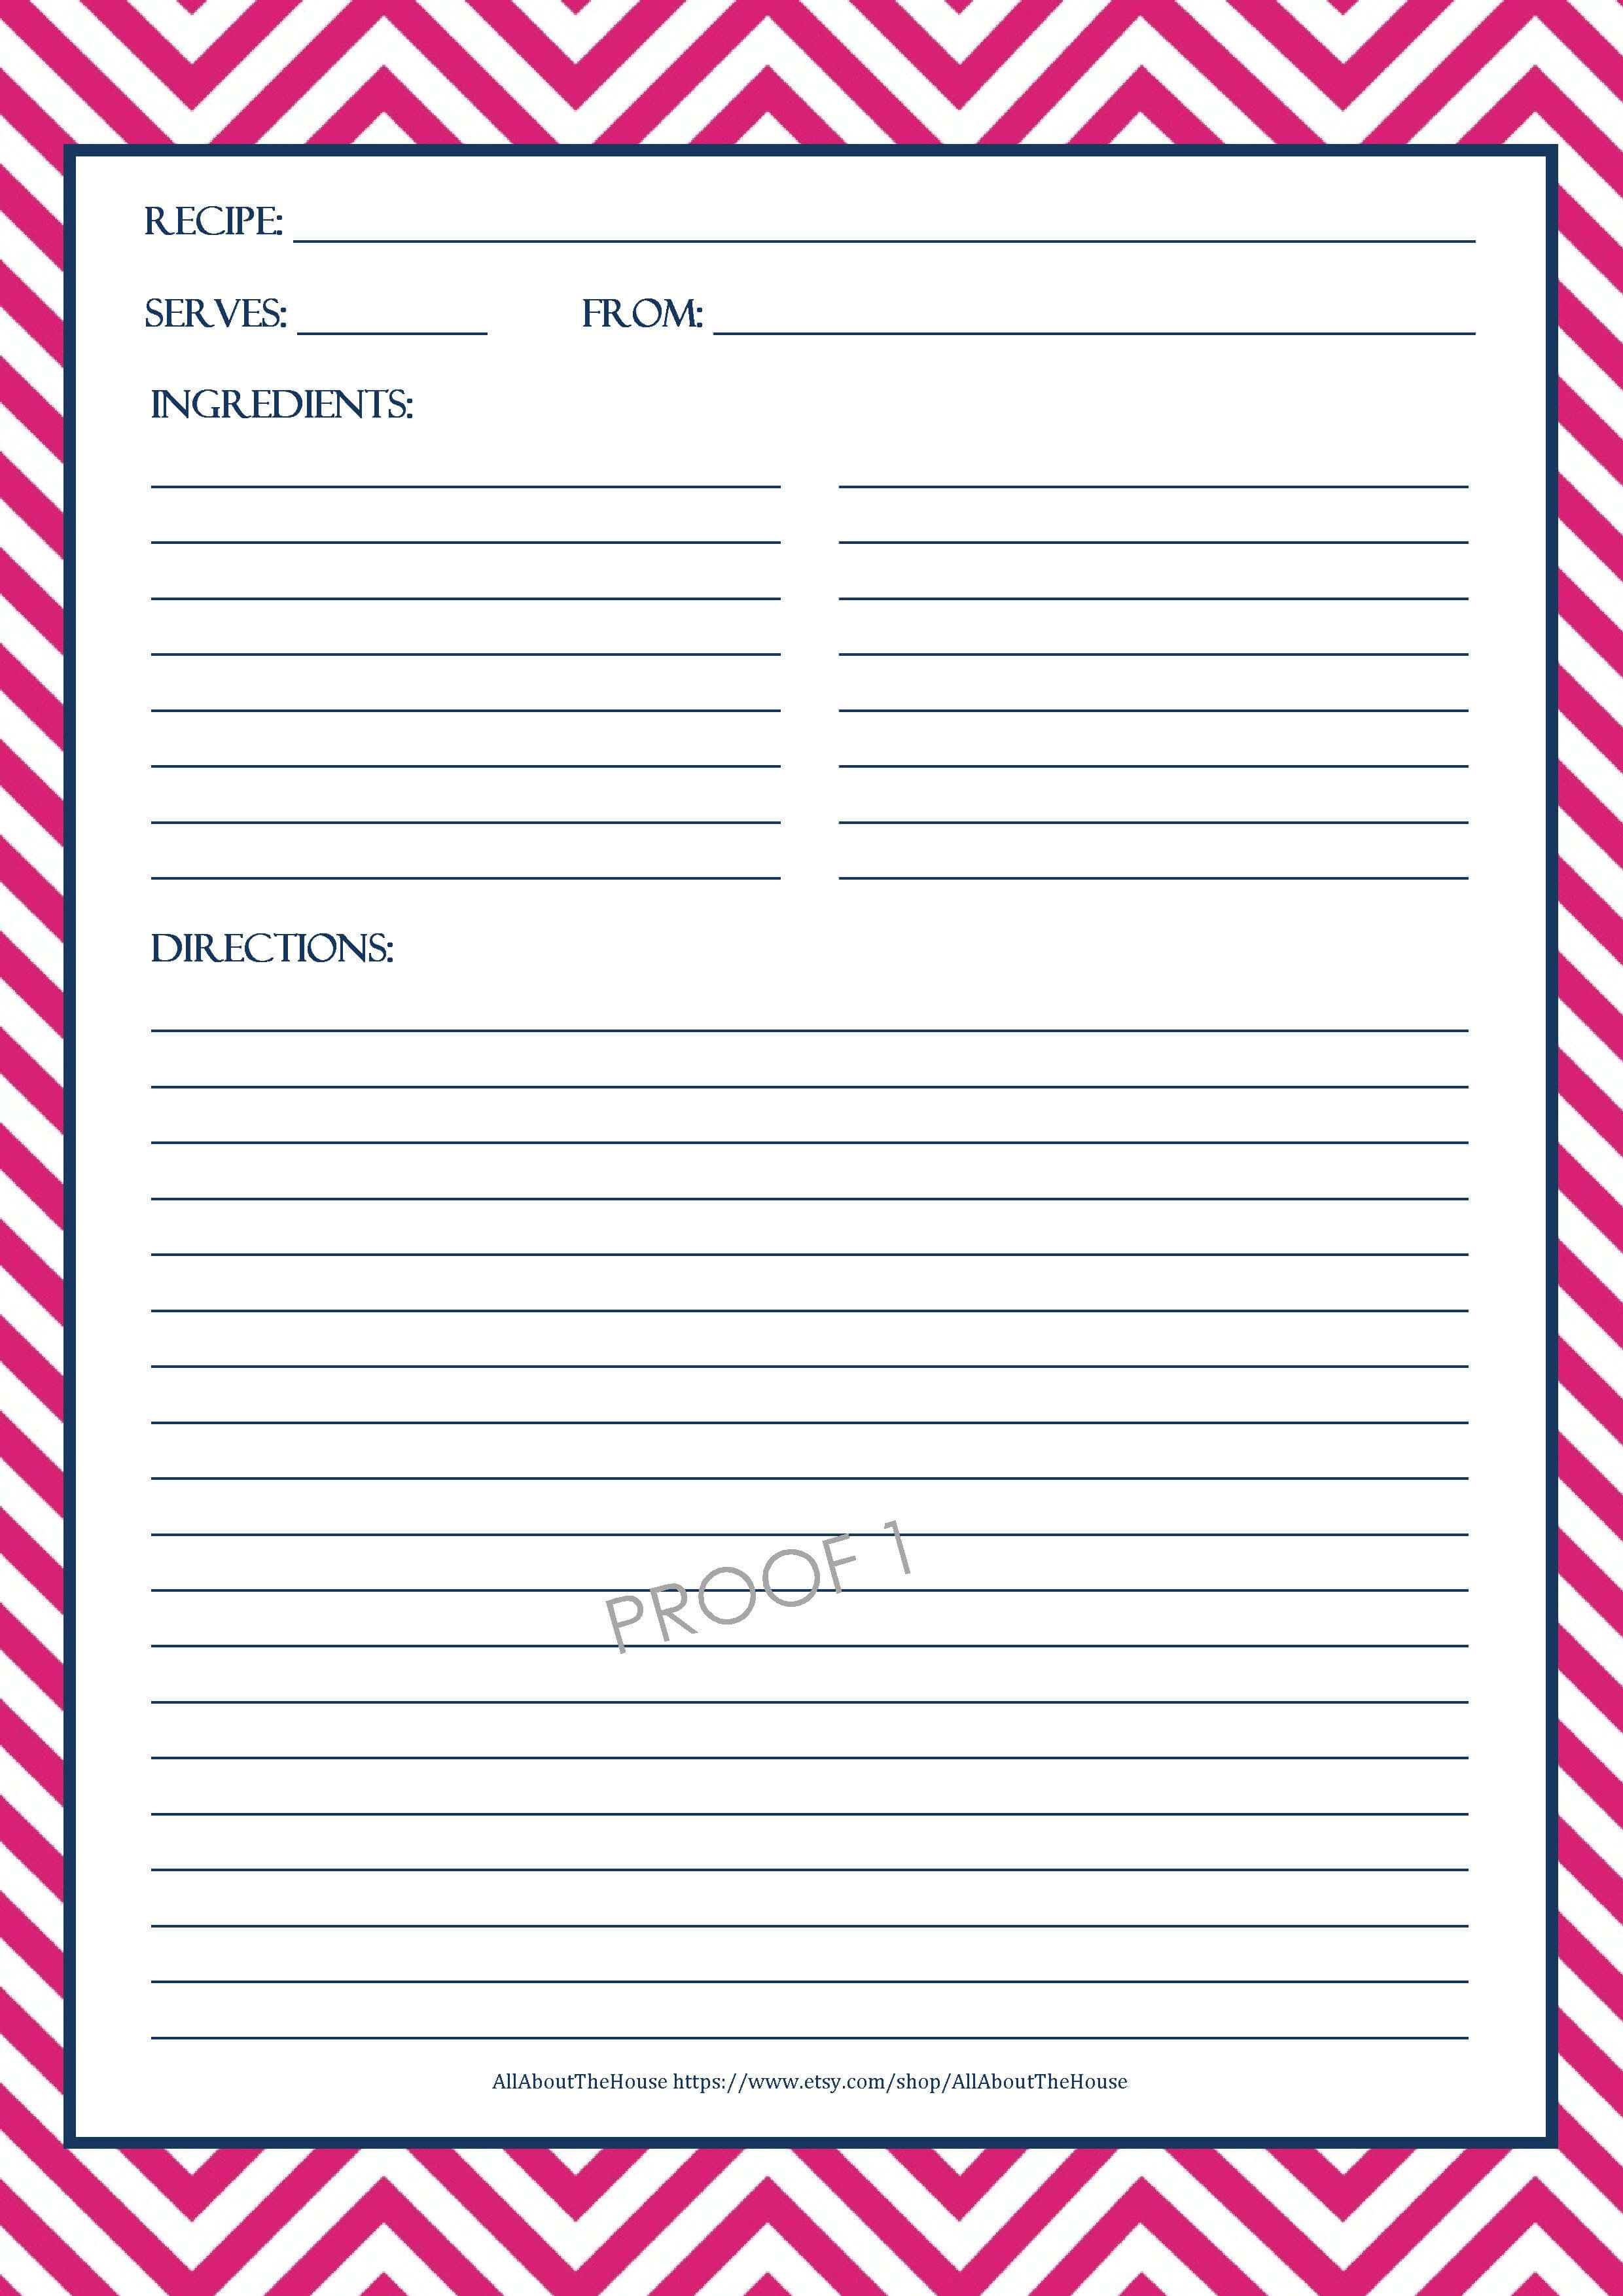 Chevron Recipe Sheet Editable | School Binder Wallpaper With Full Page Recipe Template For Word